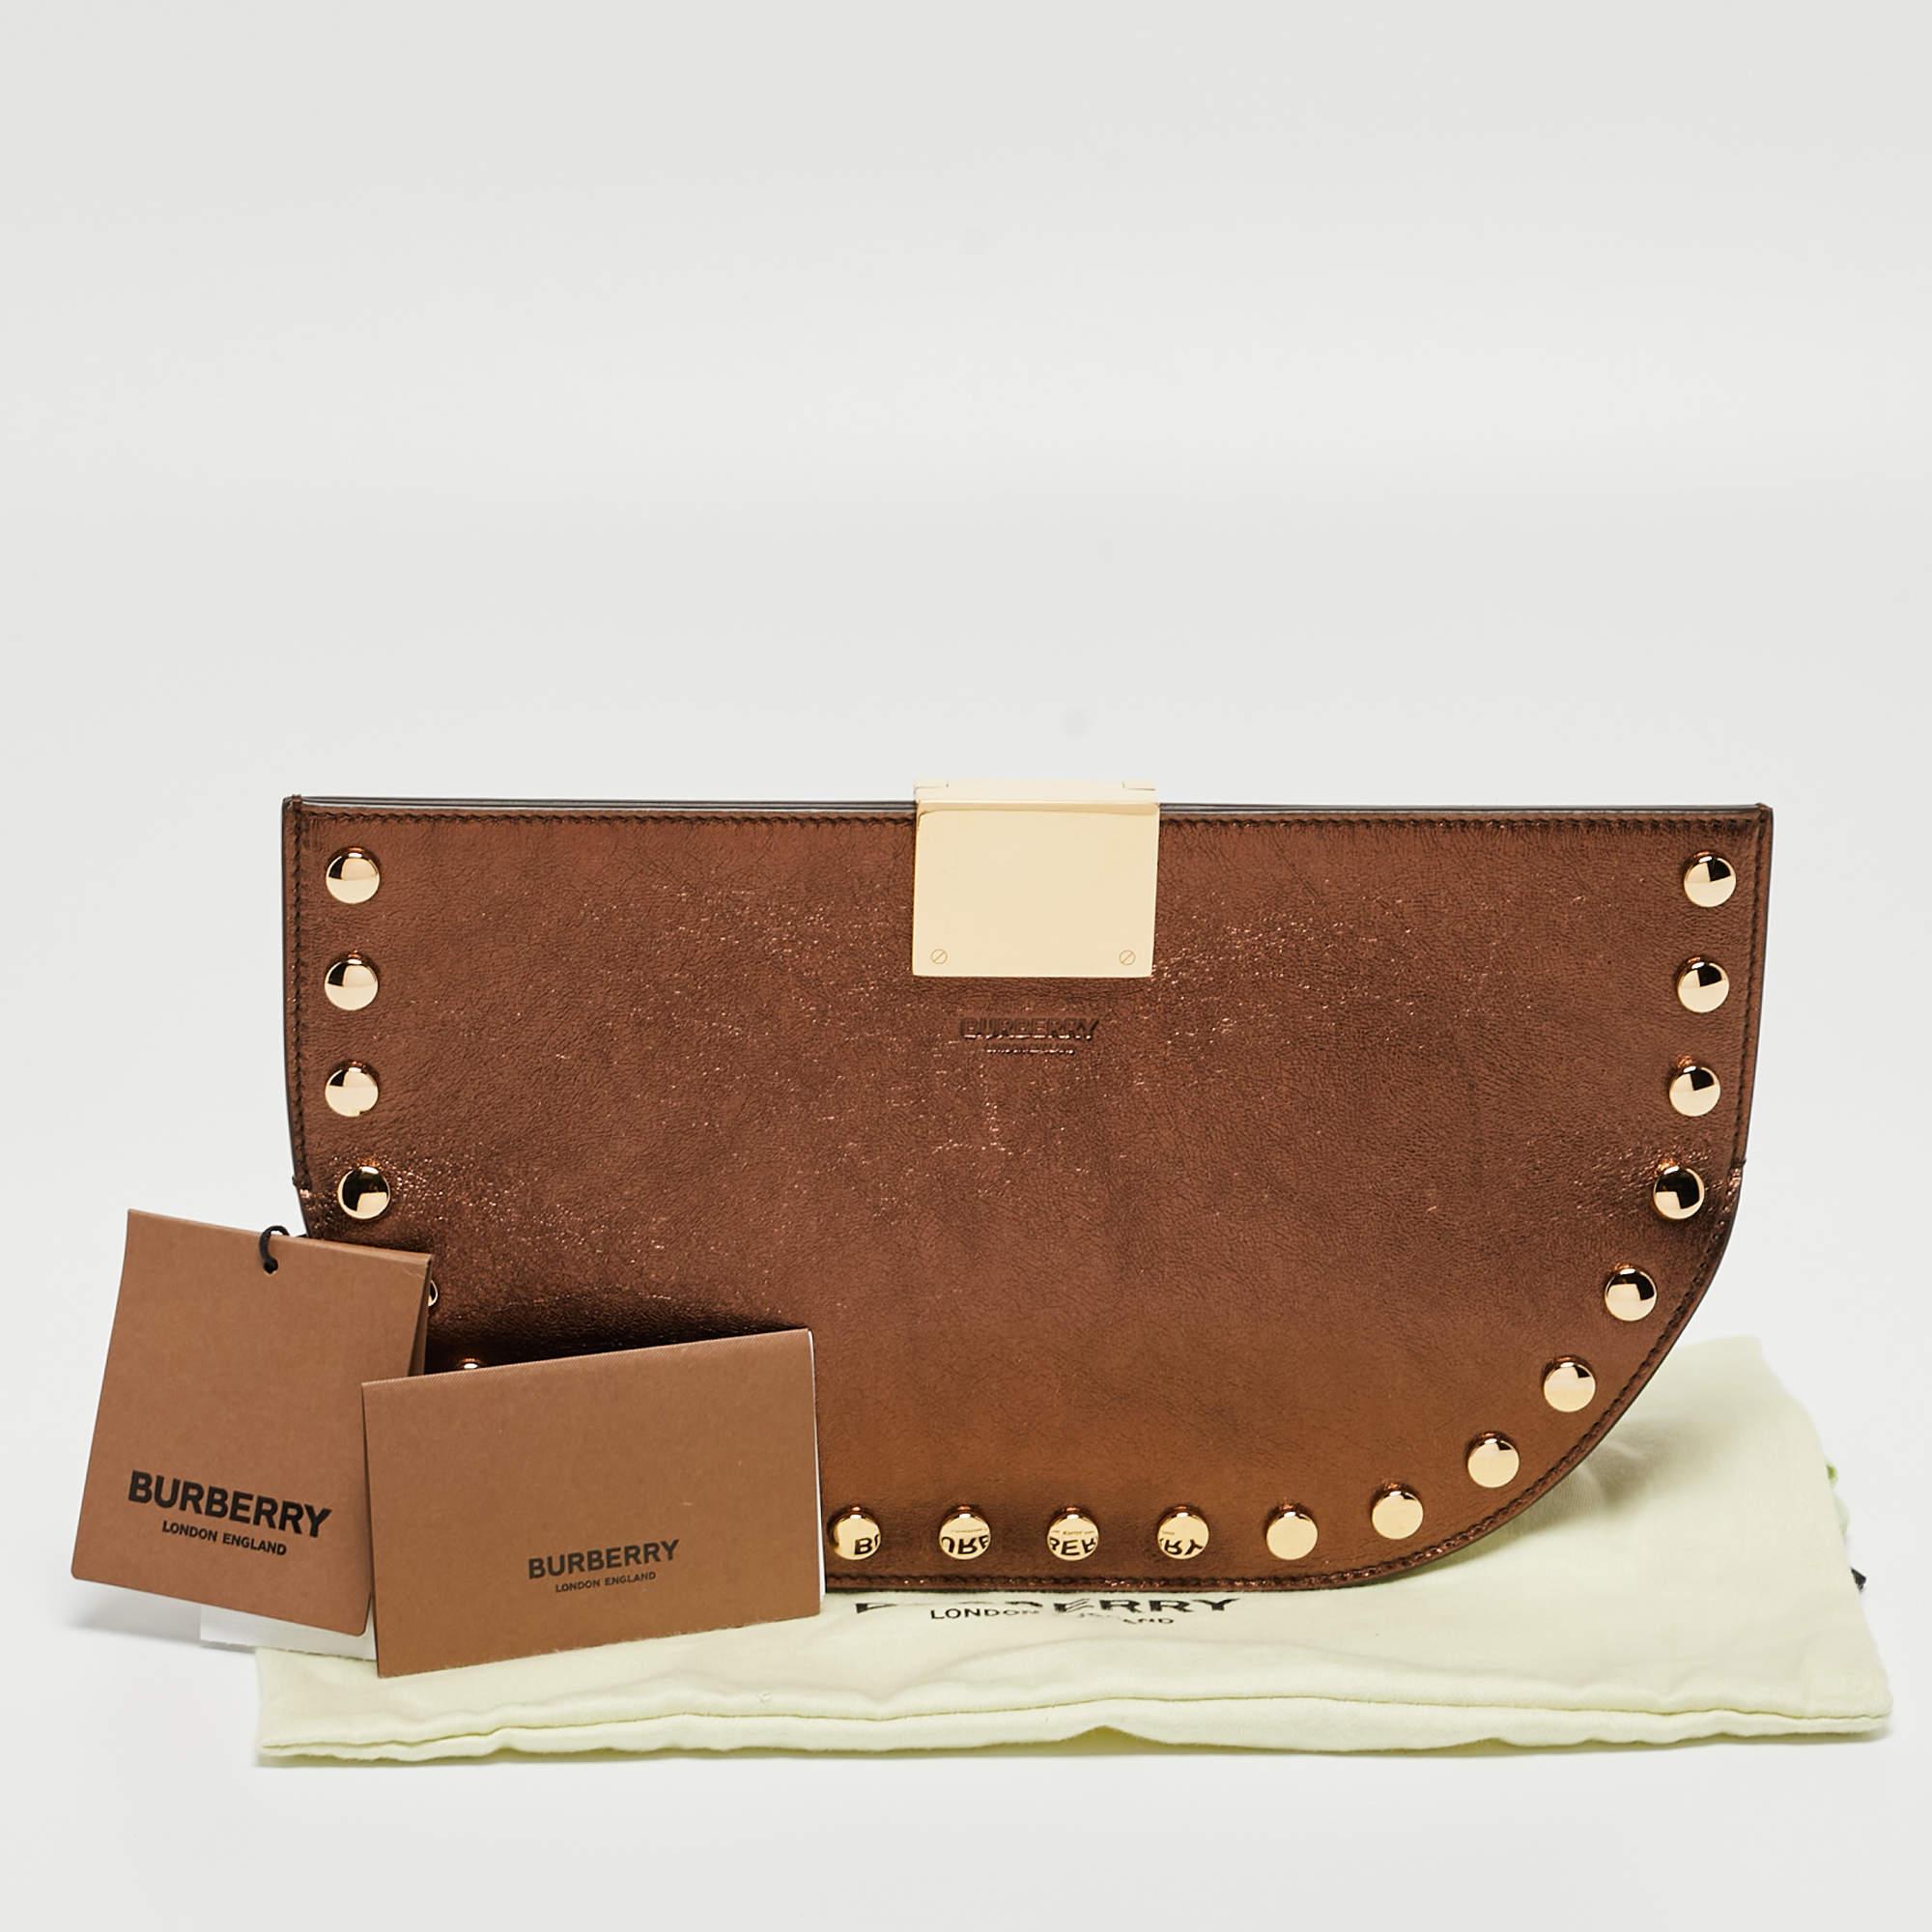 Burberry Bronze Leather Studded Olympia Clutch For Sale 8